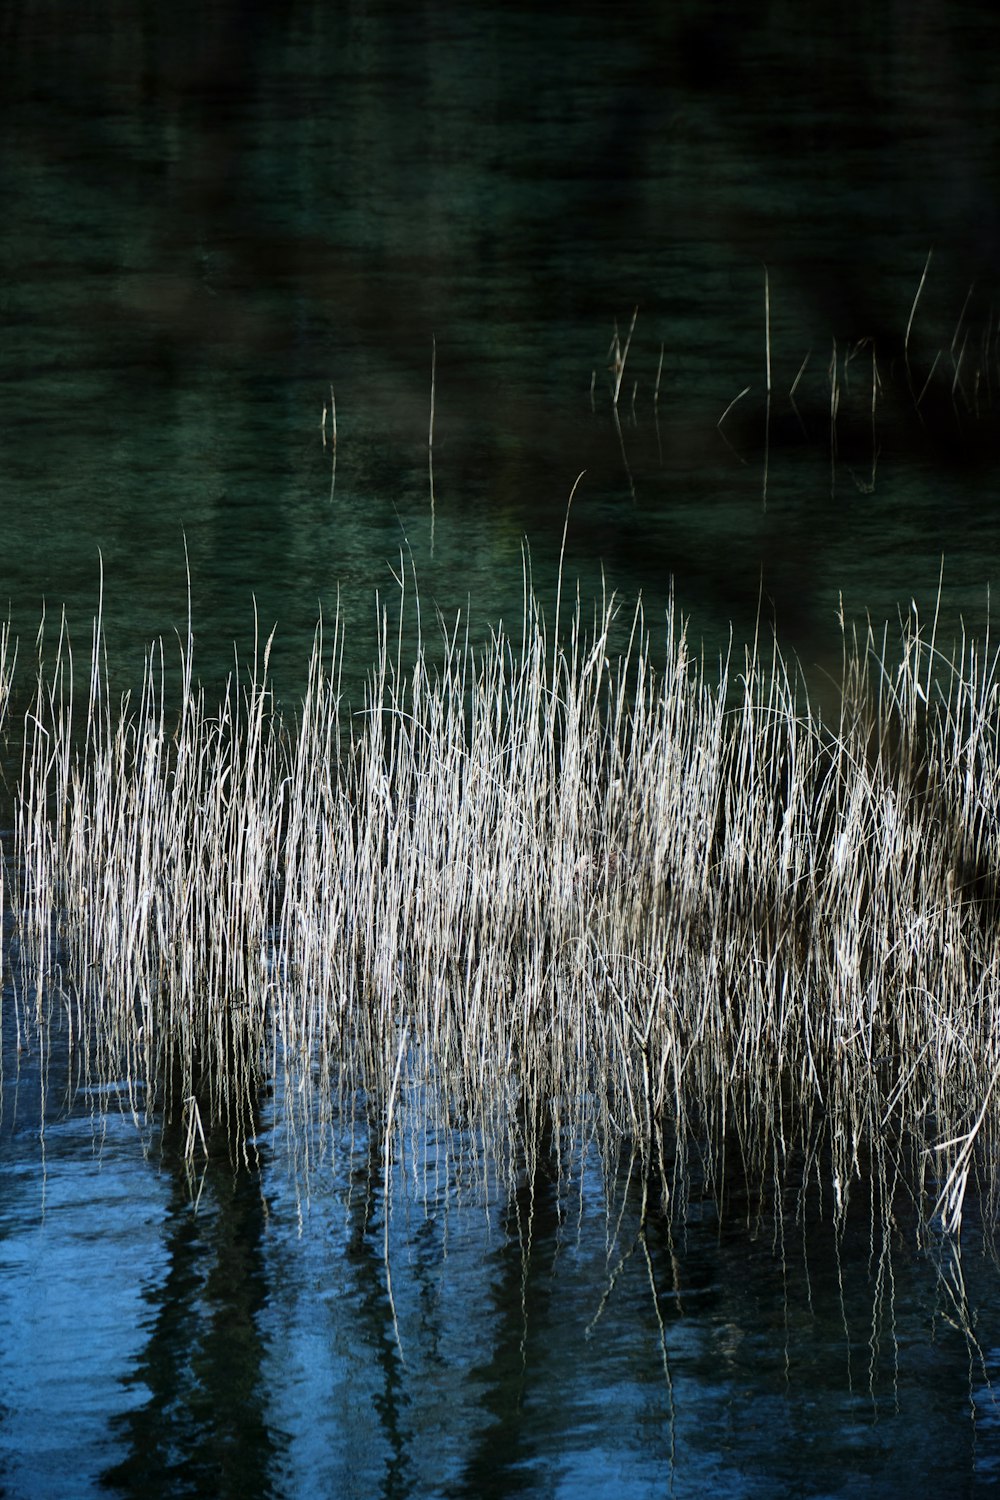 a group of reeds floating on top of a body of water